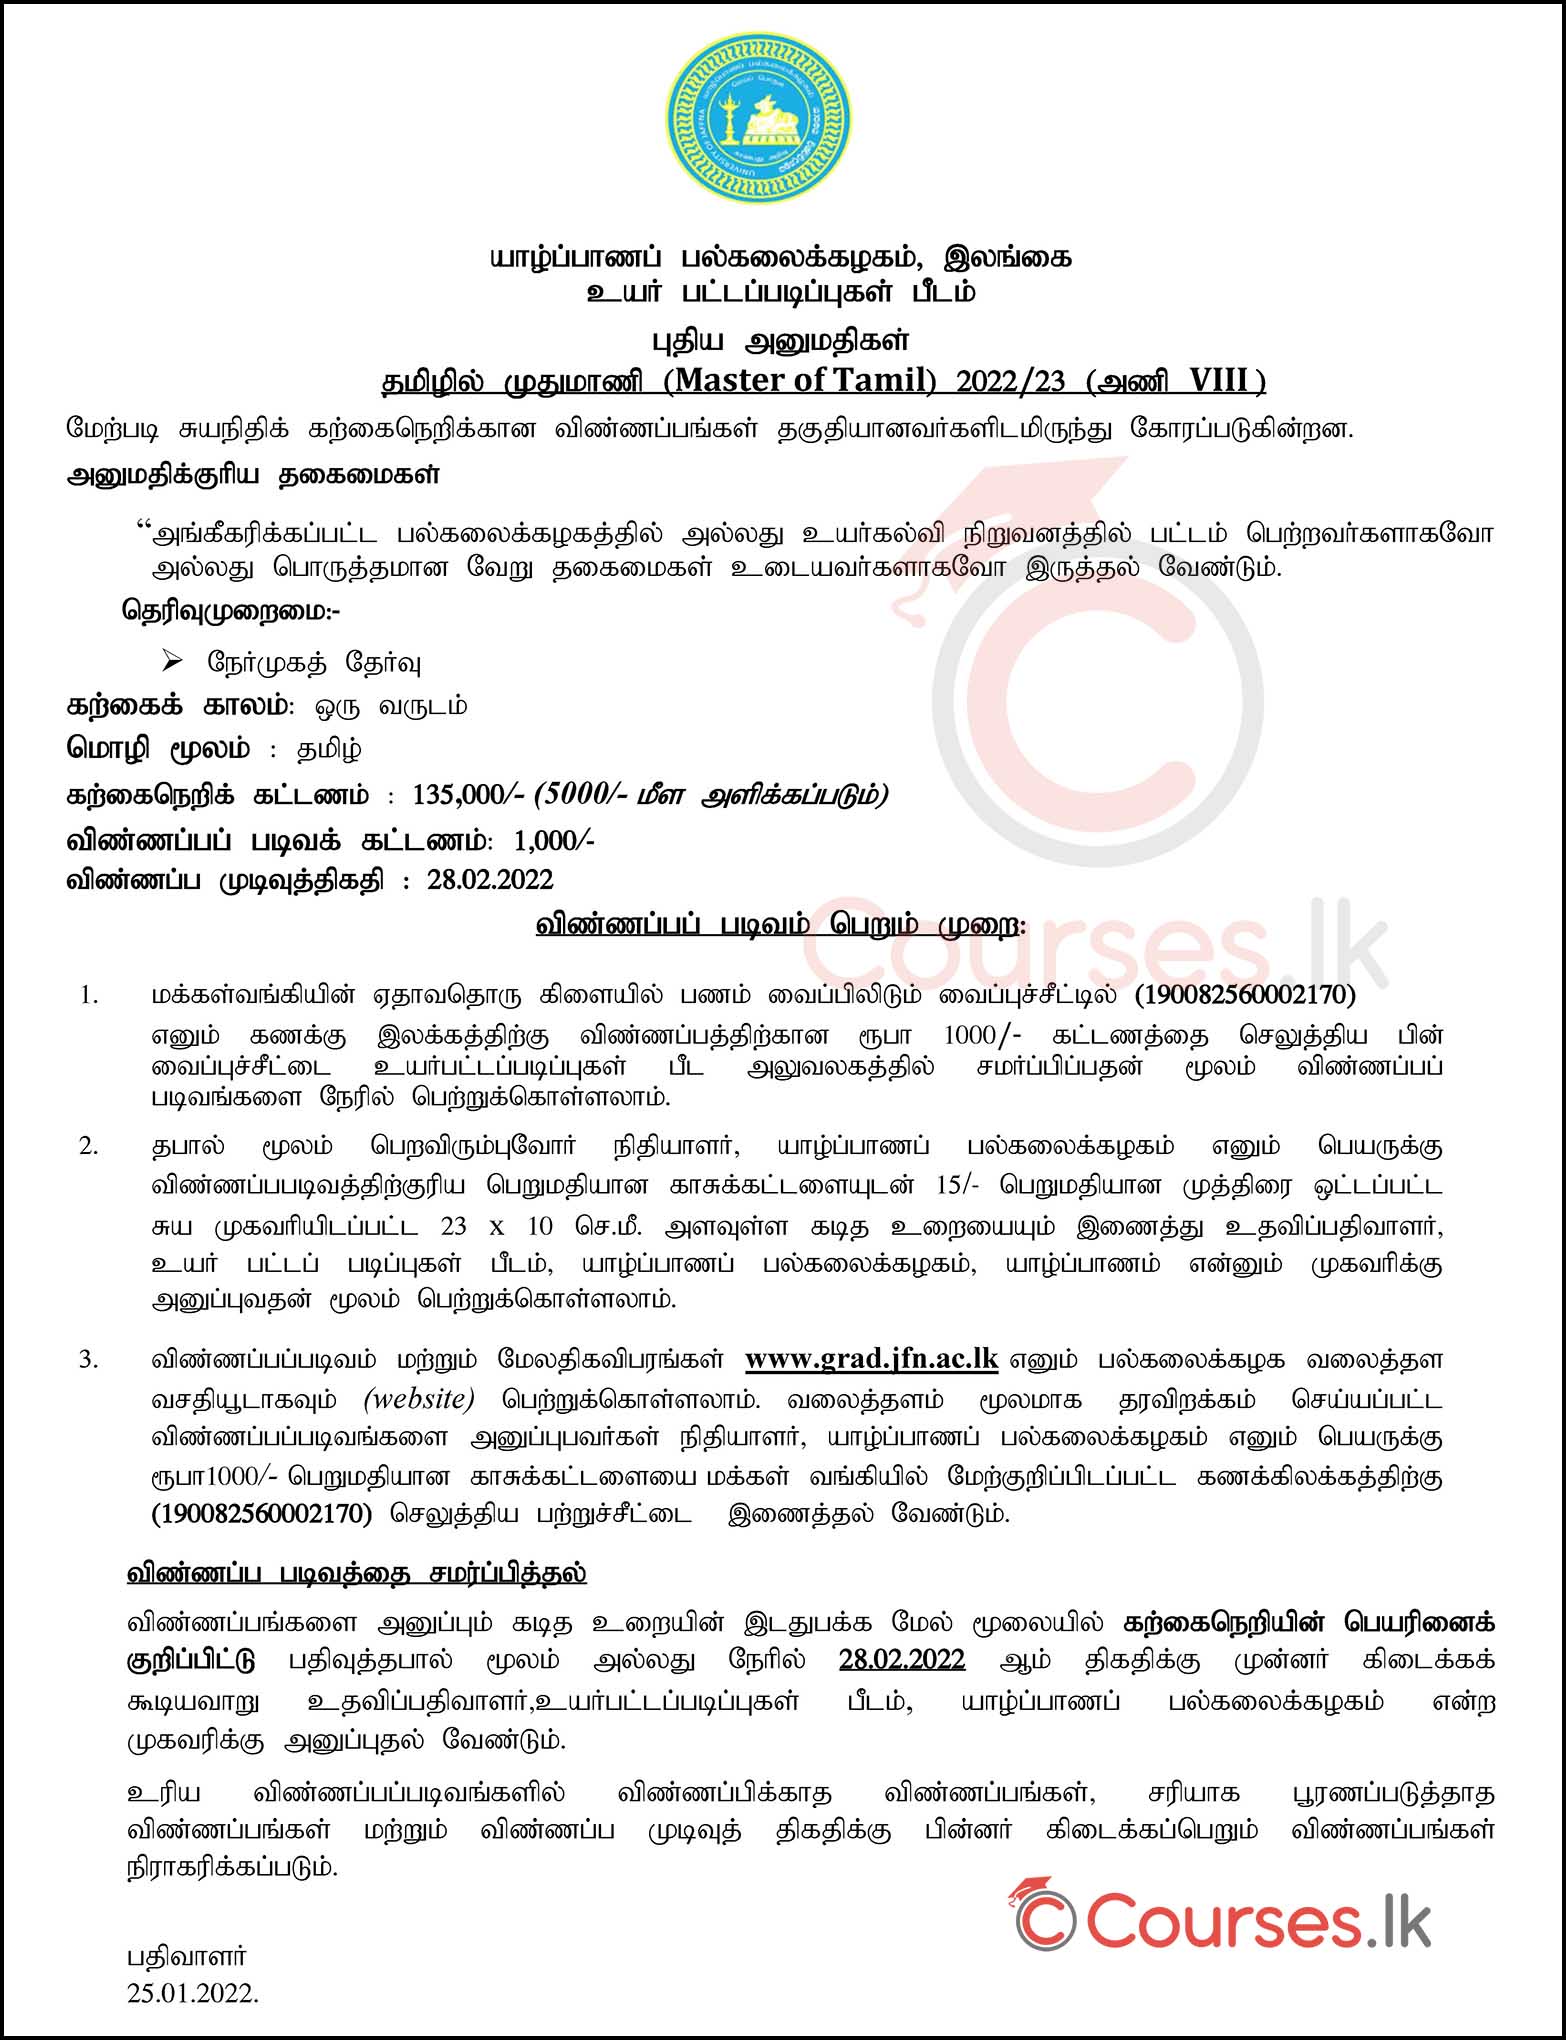 Call for Applications - Master of Tamil Programme 2022/2023 (Batch 8) from the Faculty of Graduate Studies, University of Jaffna